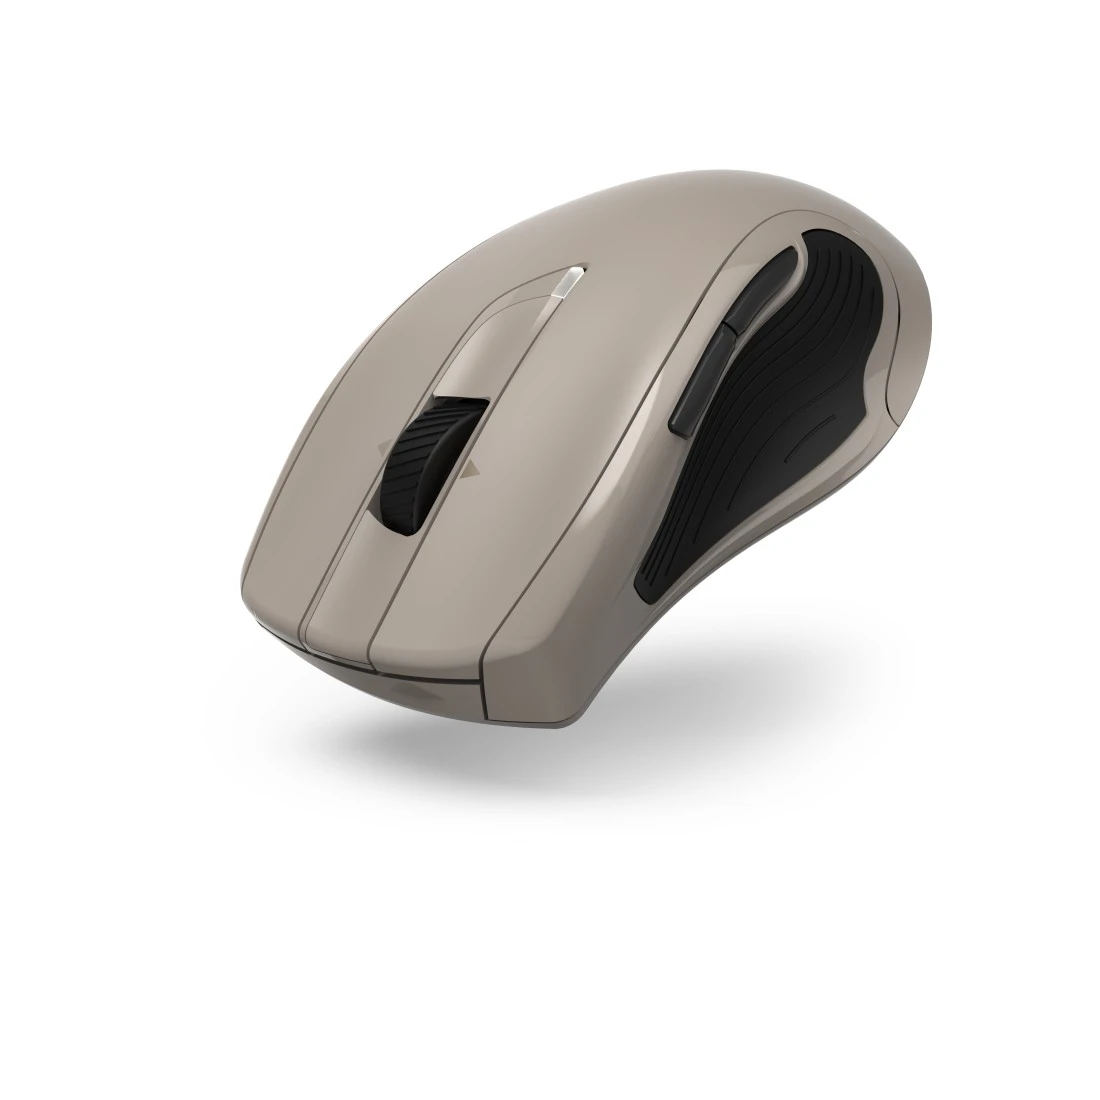 You Recently Viewed Hama 00173019 MW-900 V2 7-Button Laser Wireless Mouse, beige Image